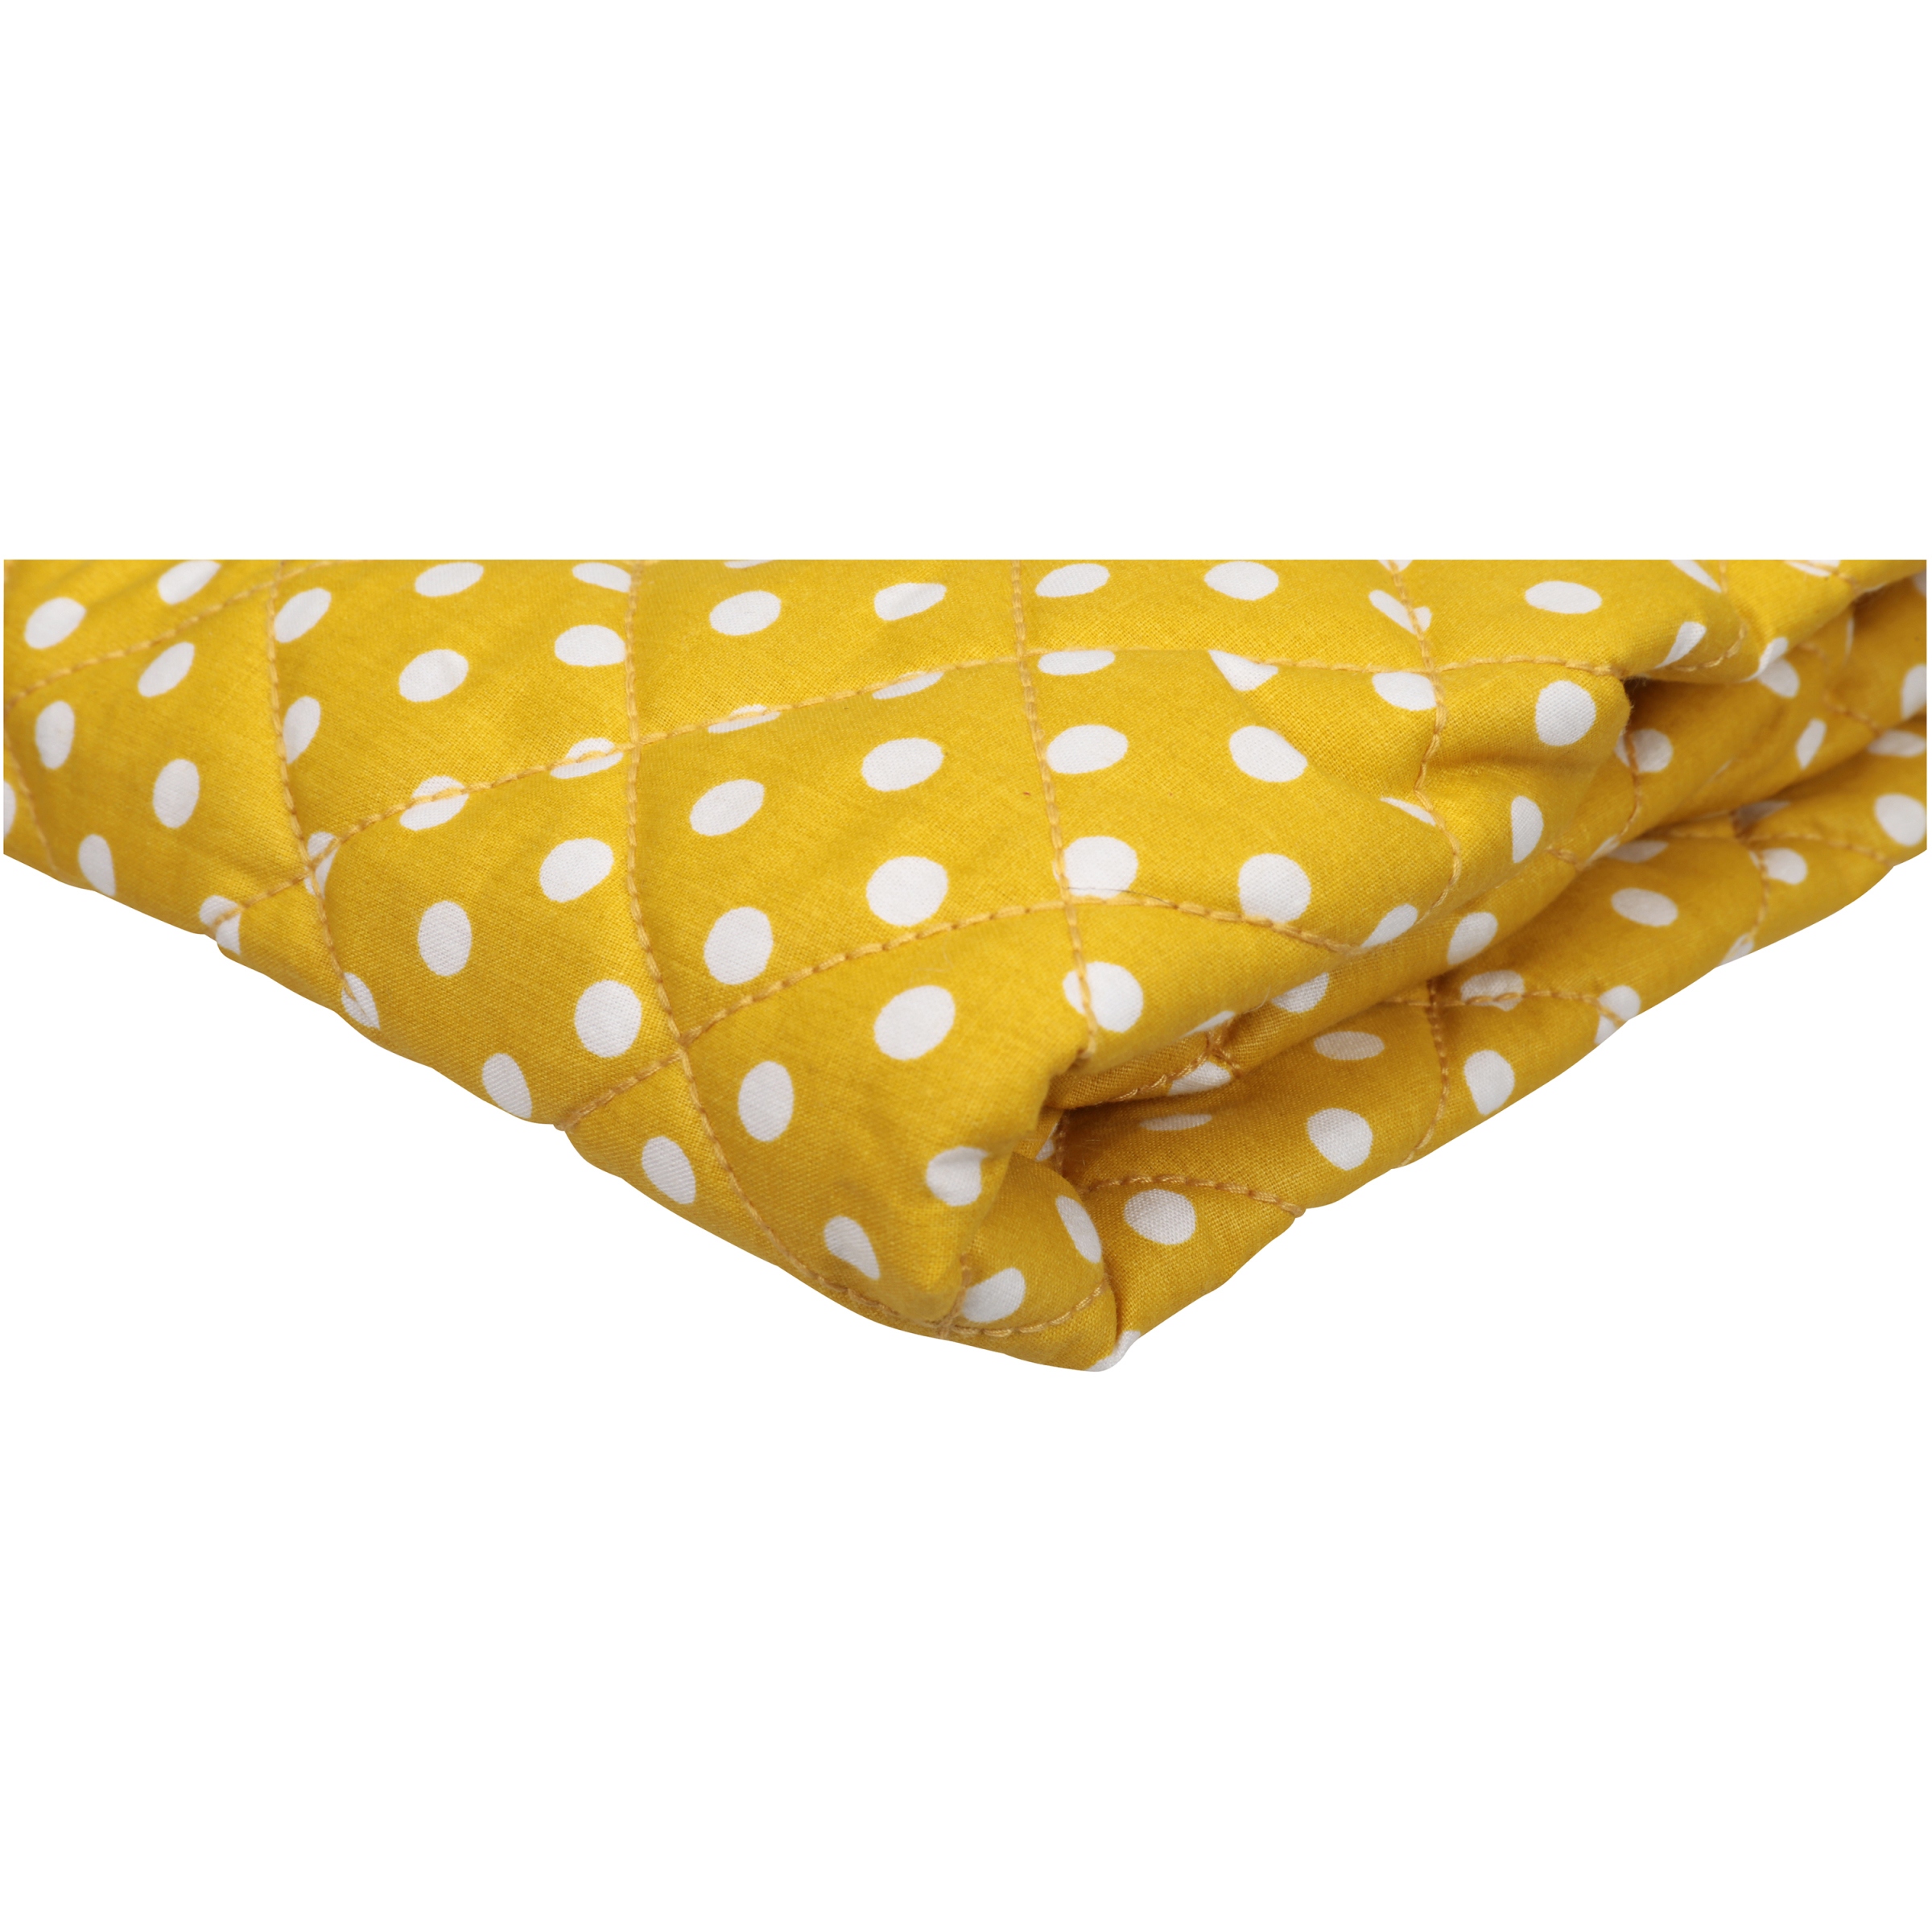 Bacati Yellow Dotted & Pin Stripes Changing Pad Cover - image 3 of 3